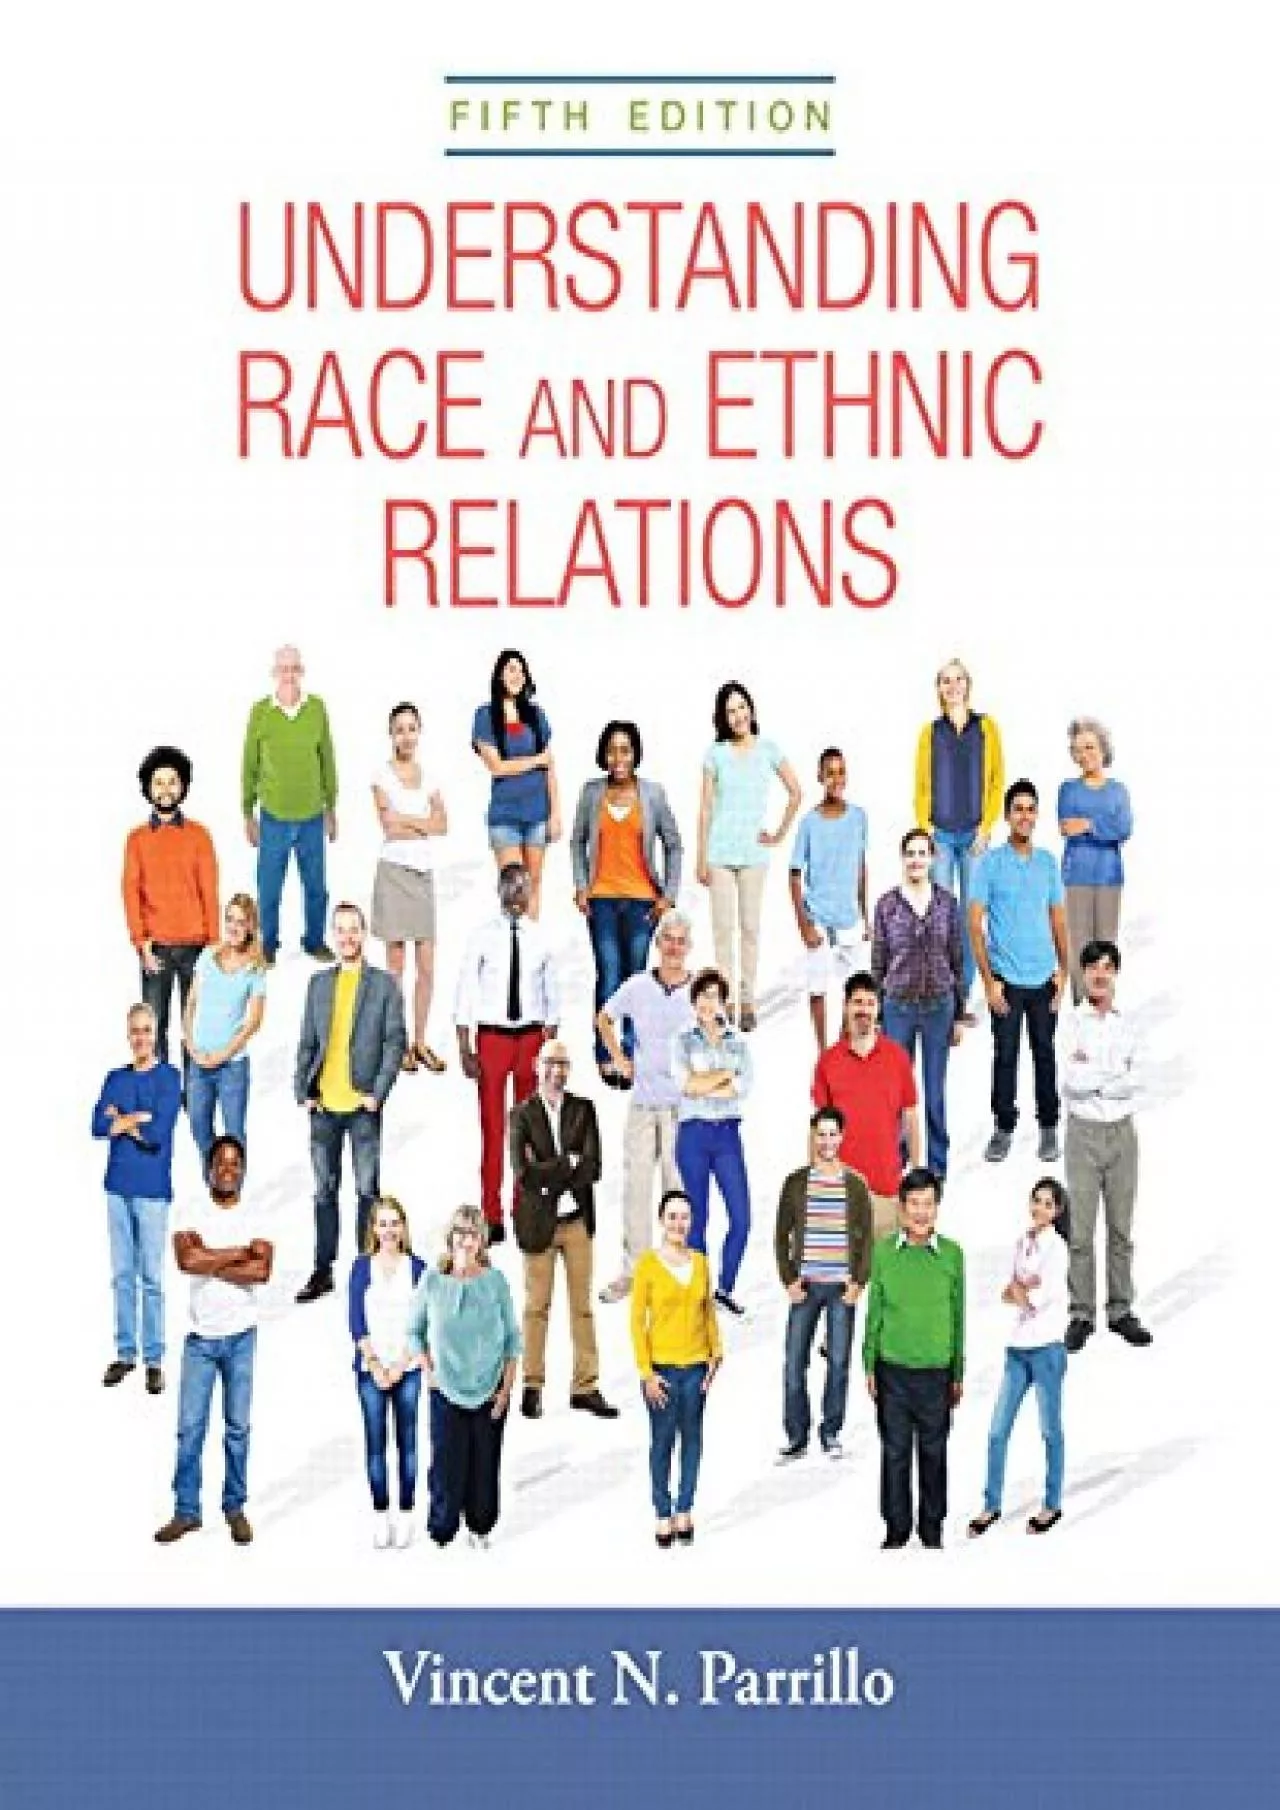 (BOOK)-Understanding Race and Ethnic Relations (5th Edition)